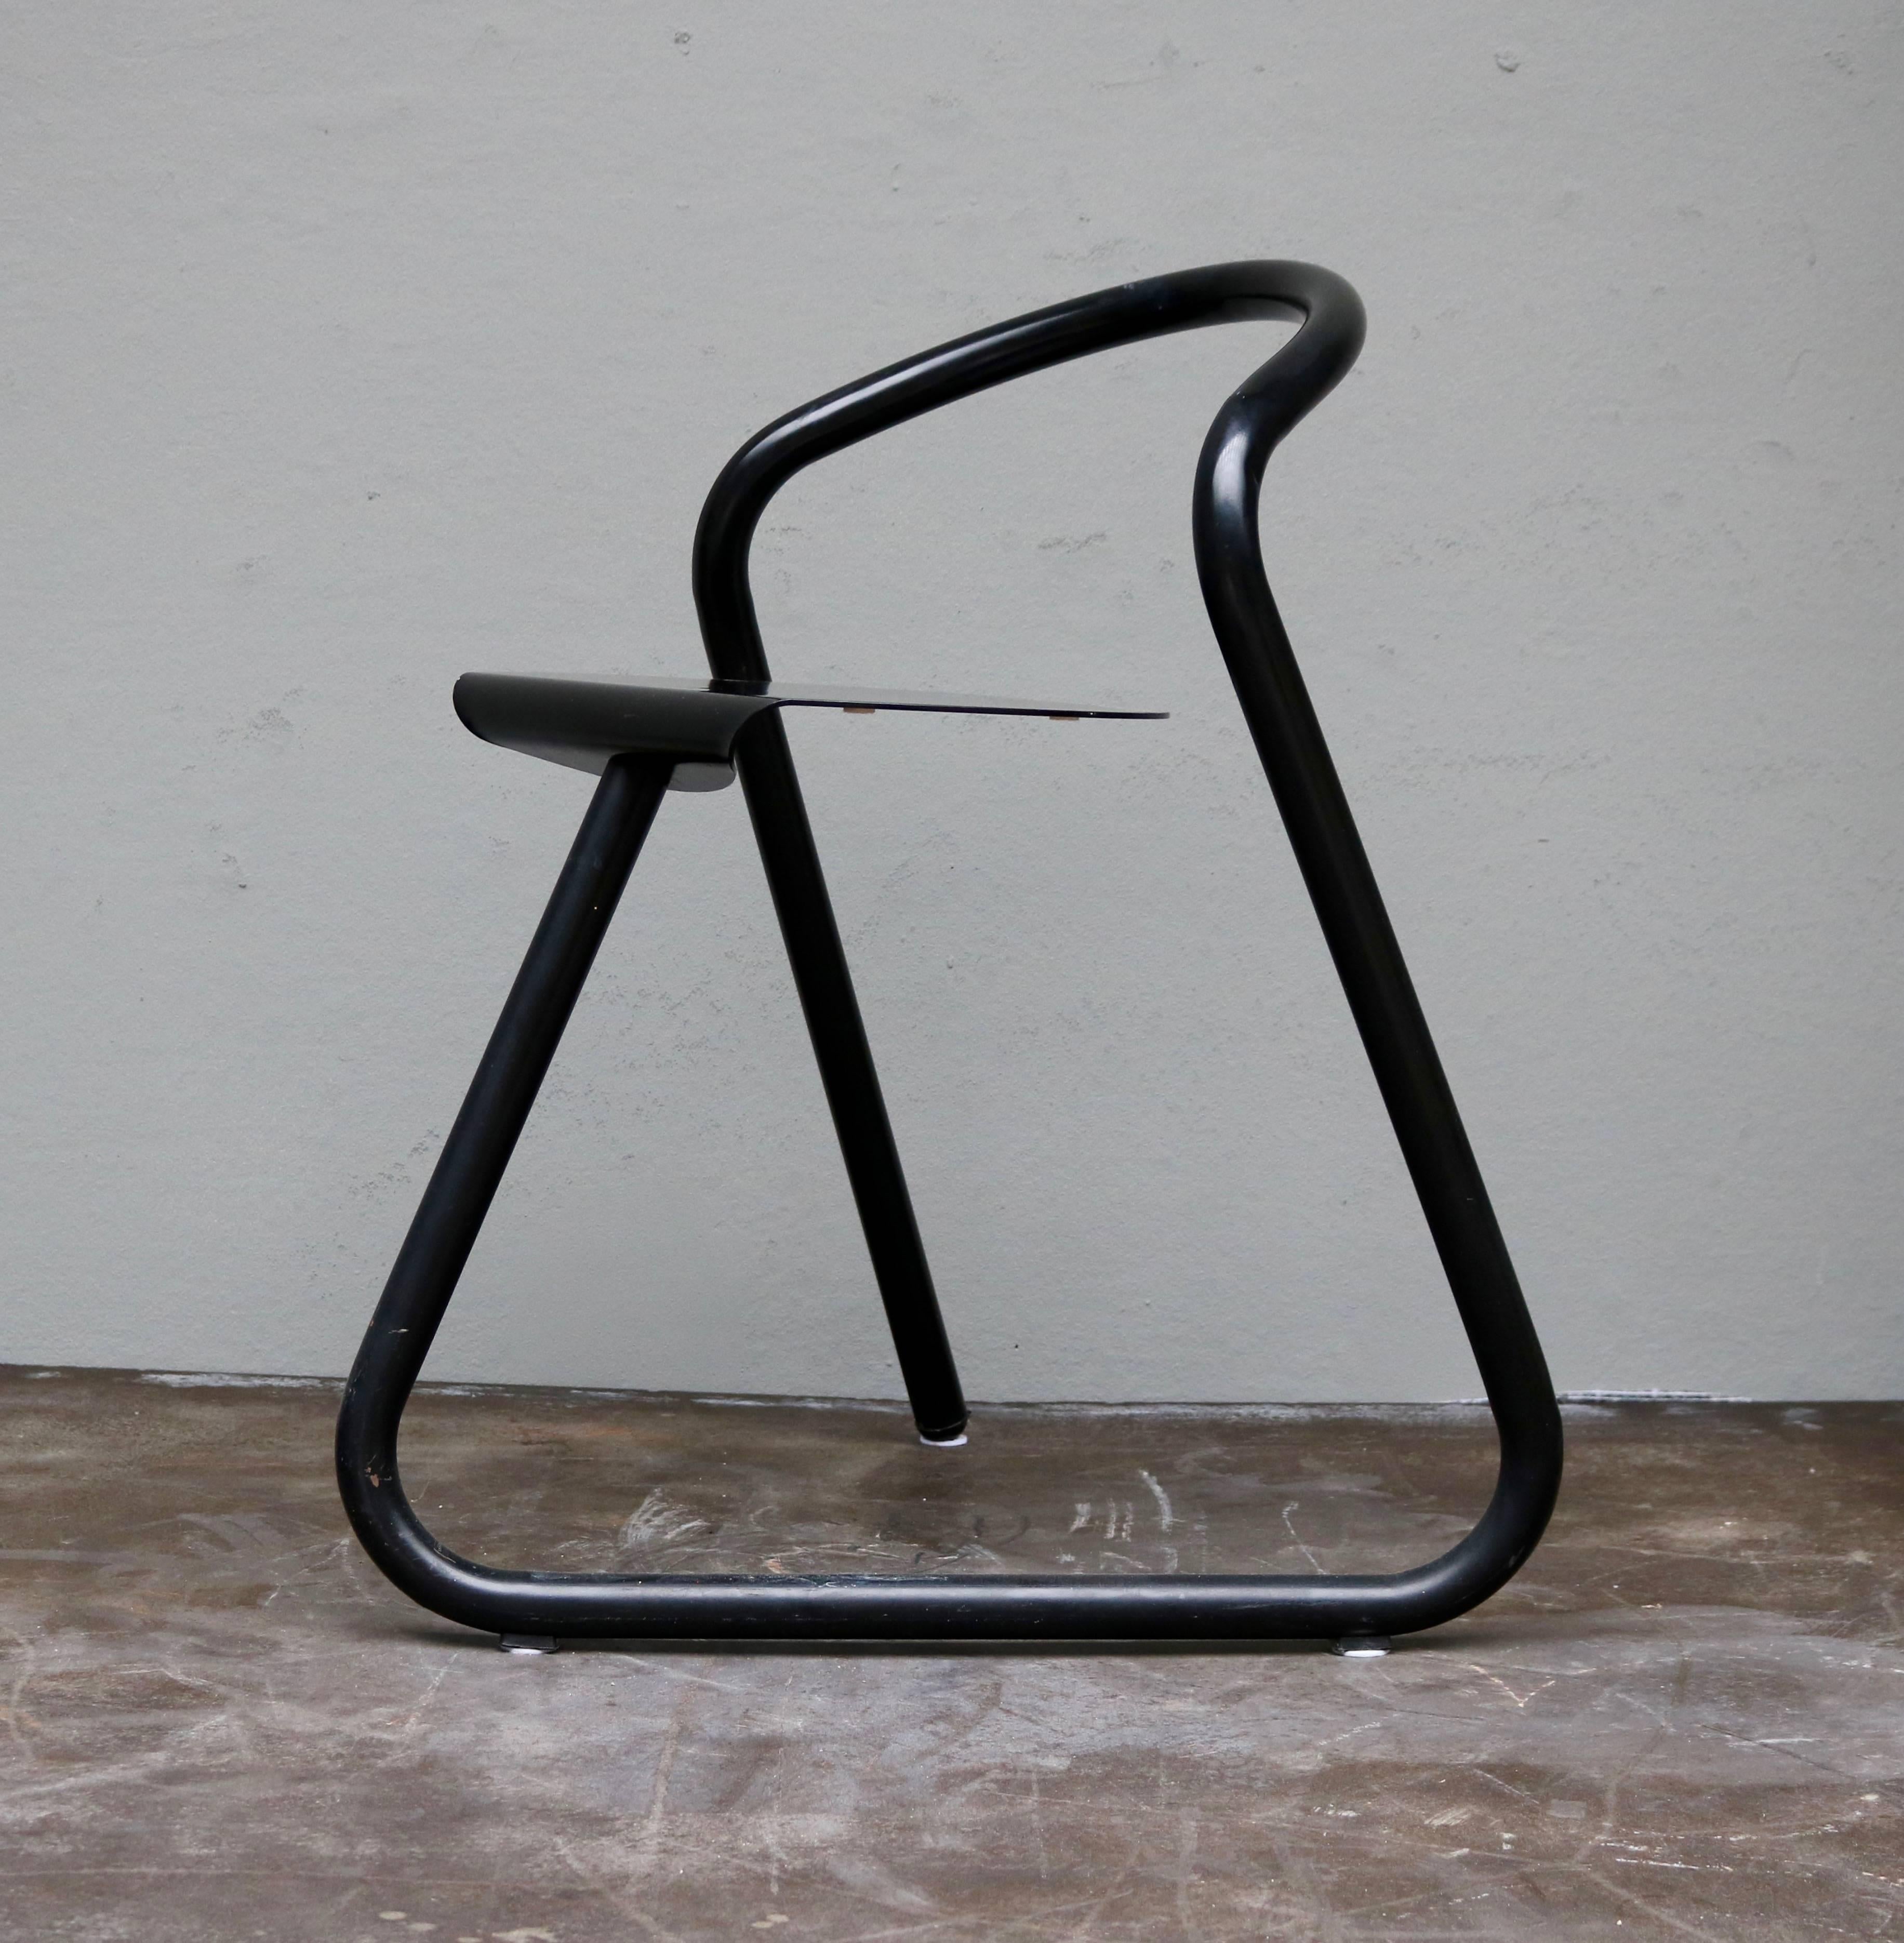 Late 20th Century Two Aluminum Chairs from the 1970s by the Danish Designer Erik Magnussen